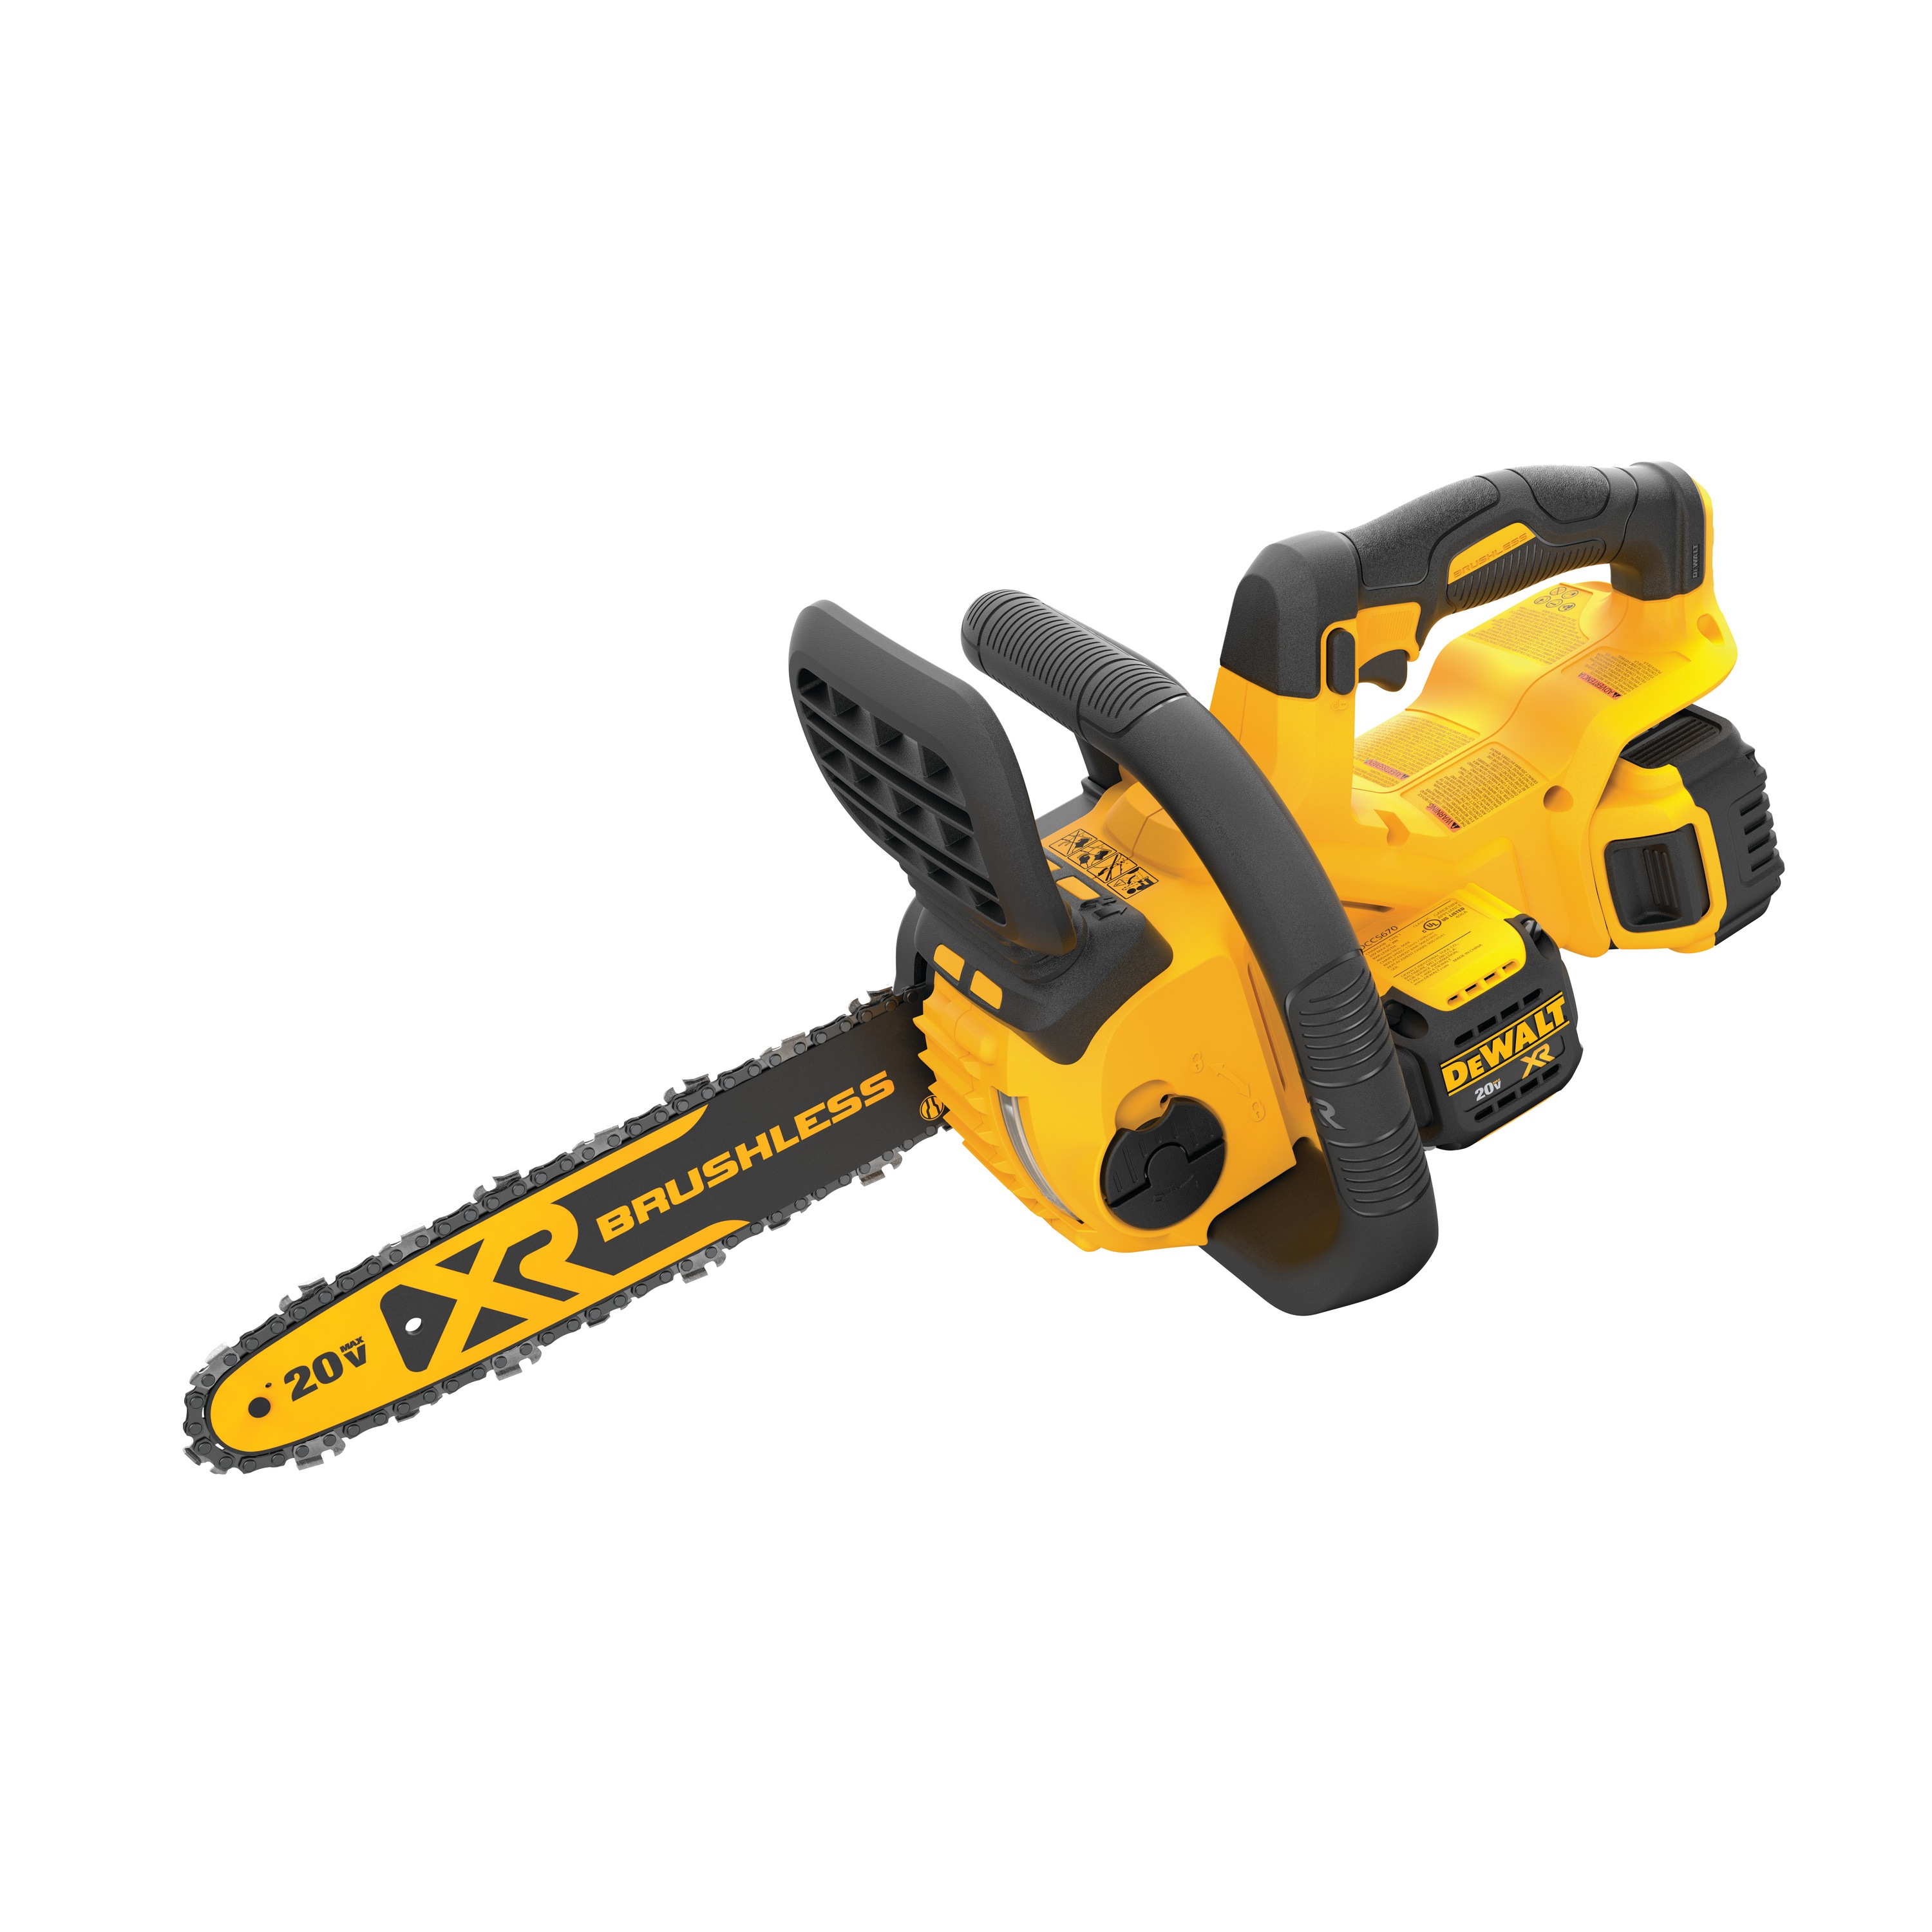 Overhead view XR® Compact 12 inch Cordless Chainsaw 